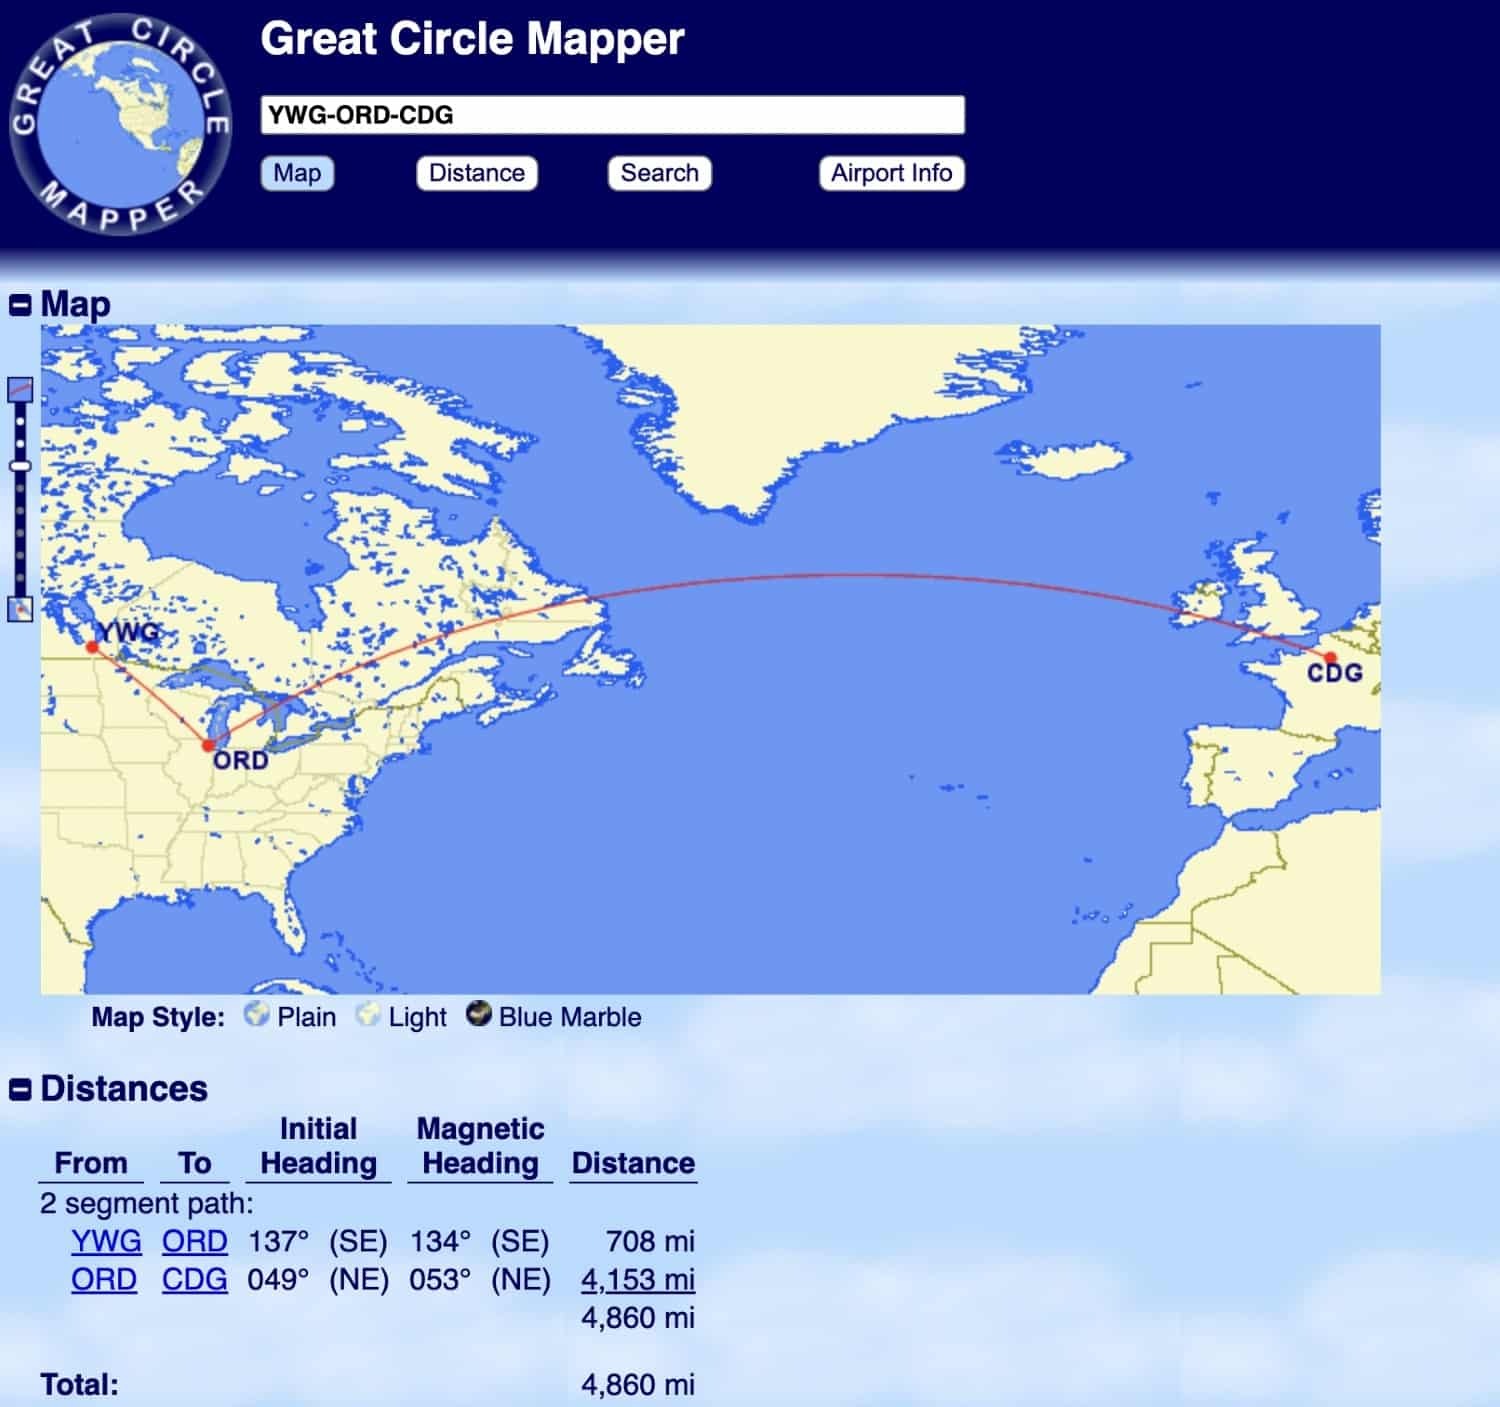 winnipeg to chicago to paris routing distance on great circle mapper